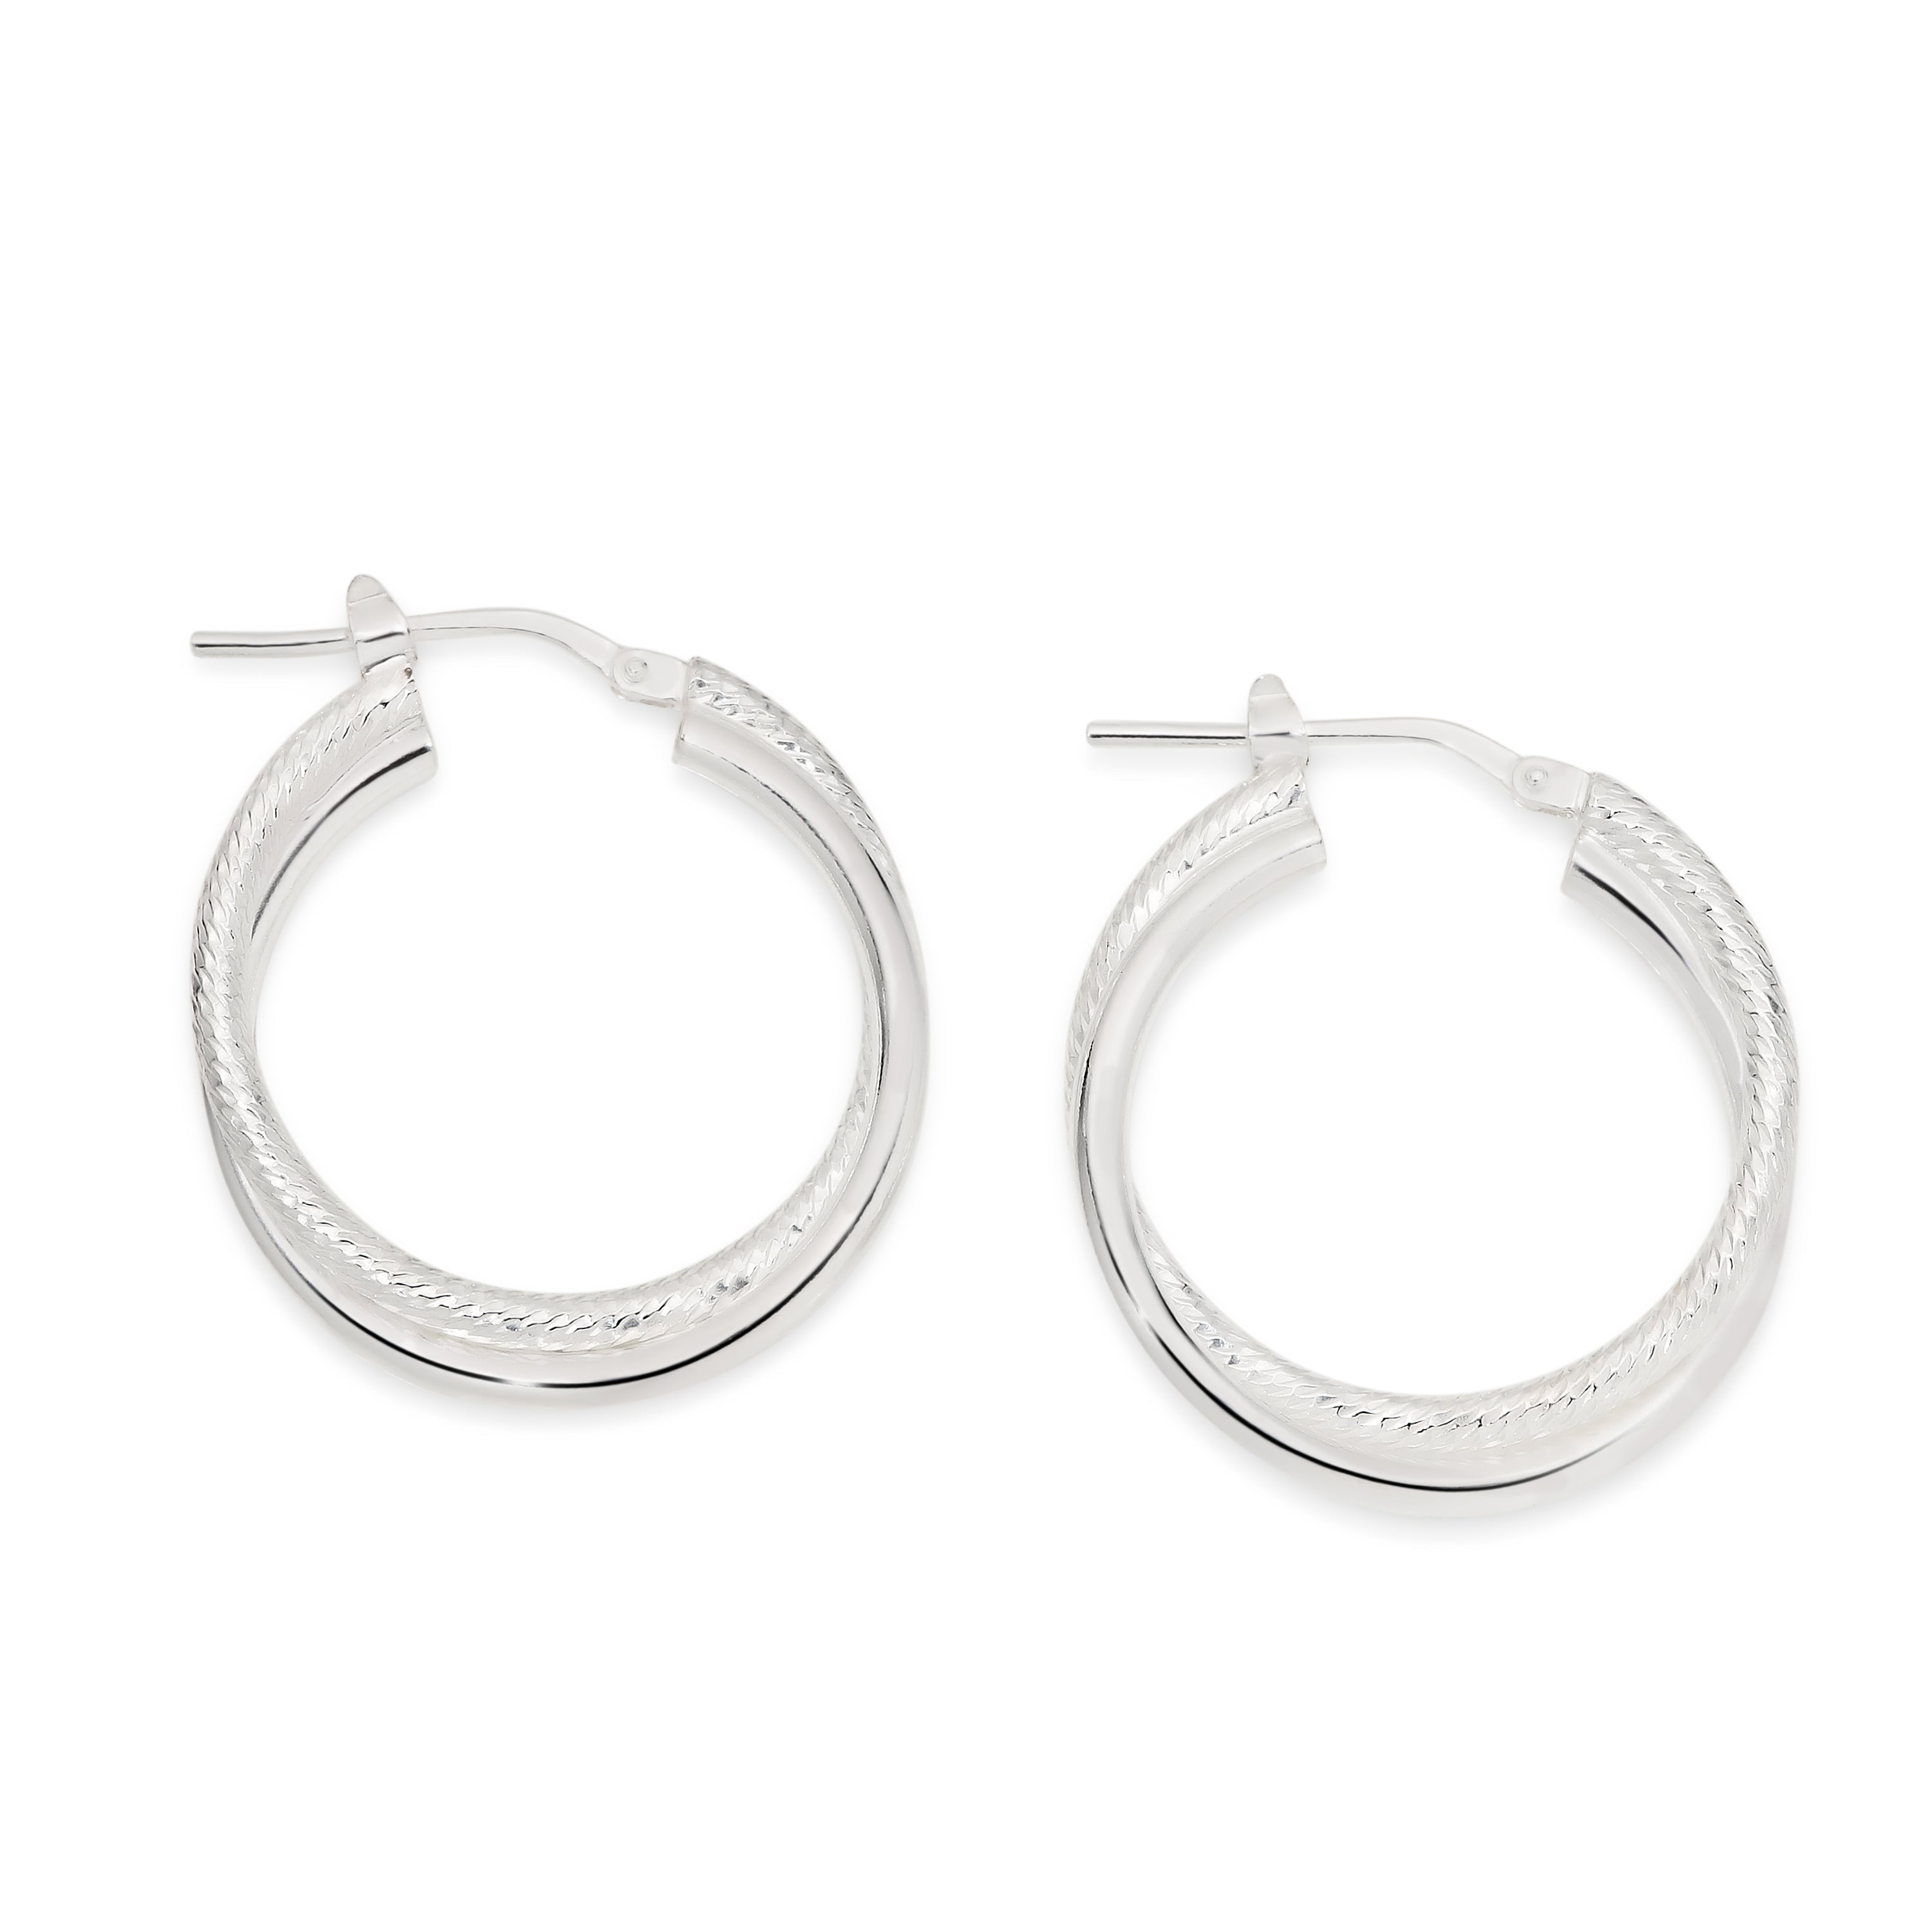 Silver double tube polished & textured hoops 20mm